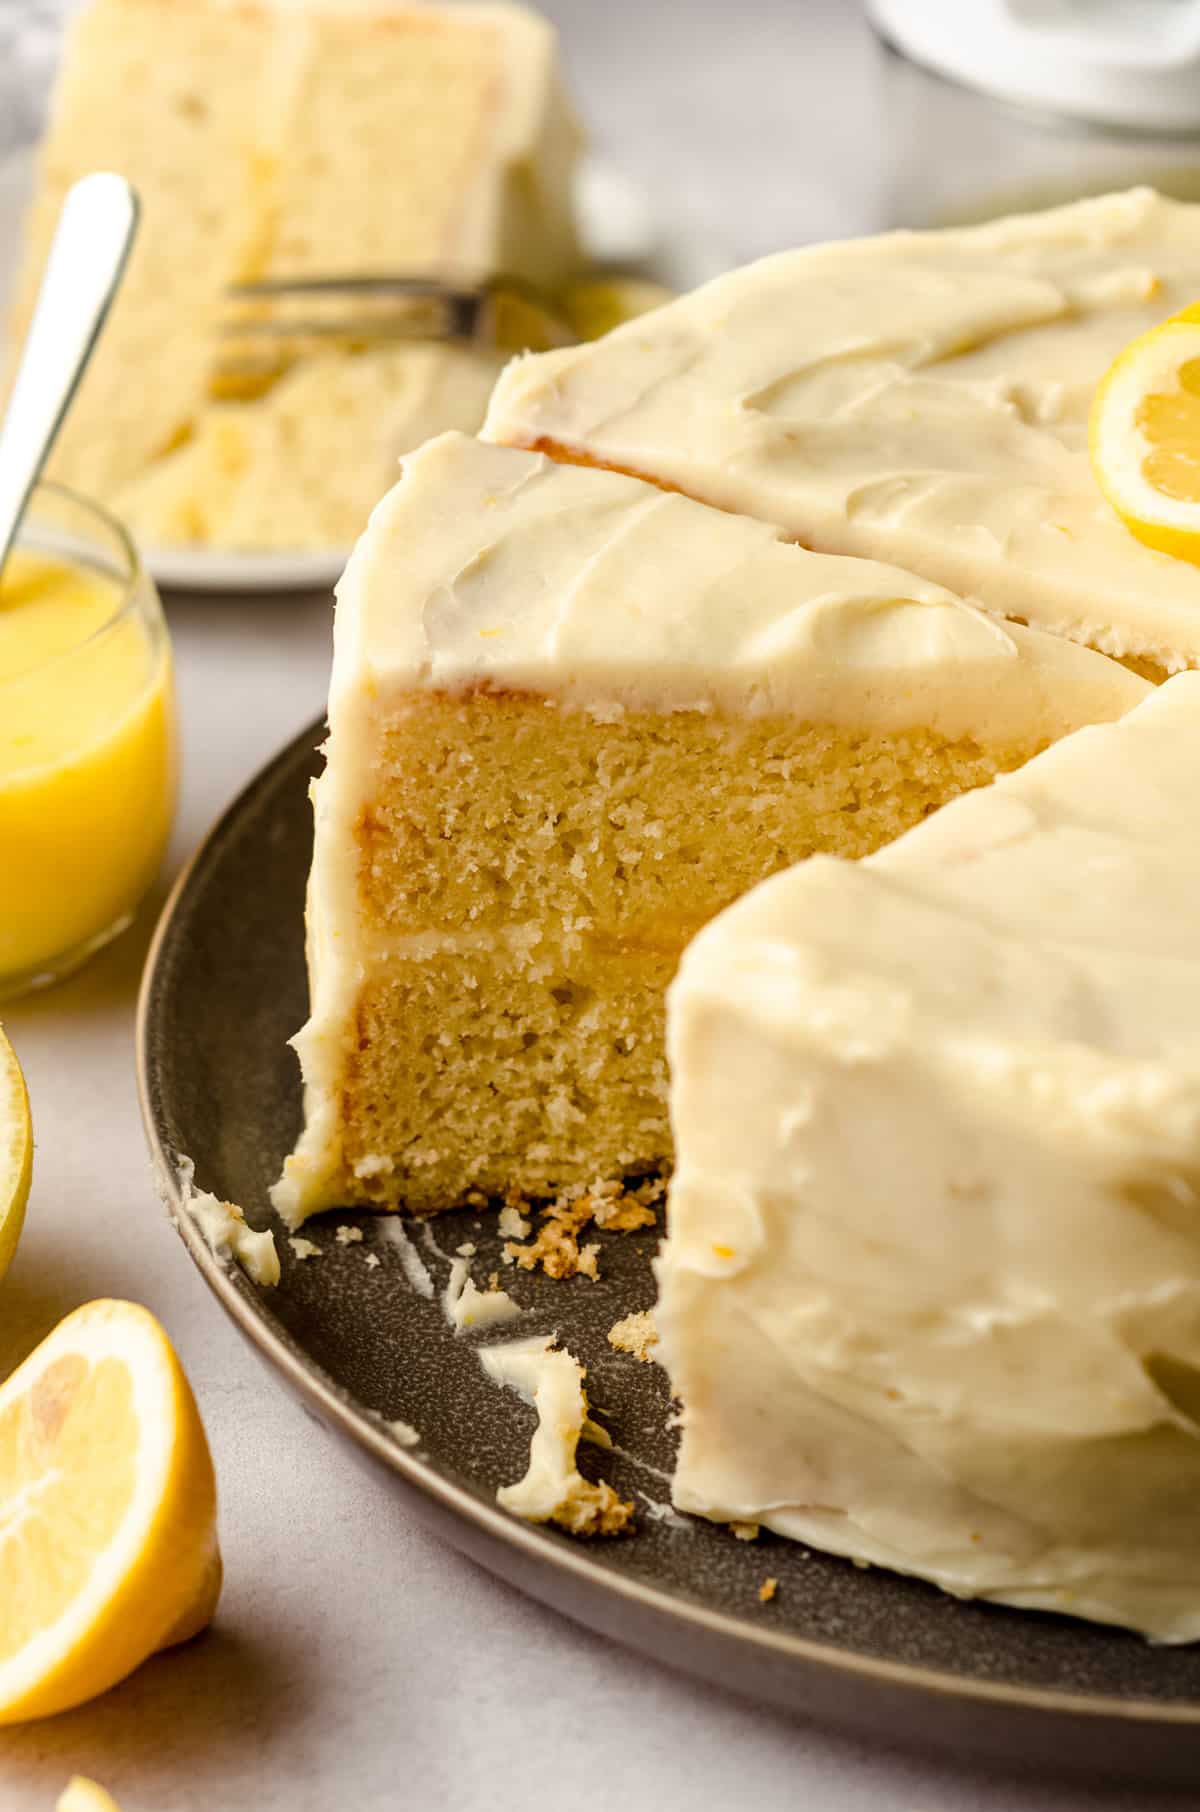 A lemon layer cake, sliced so you can see the lemon curd filling.